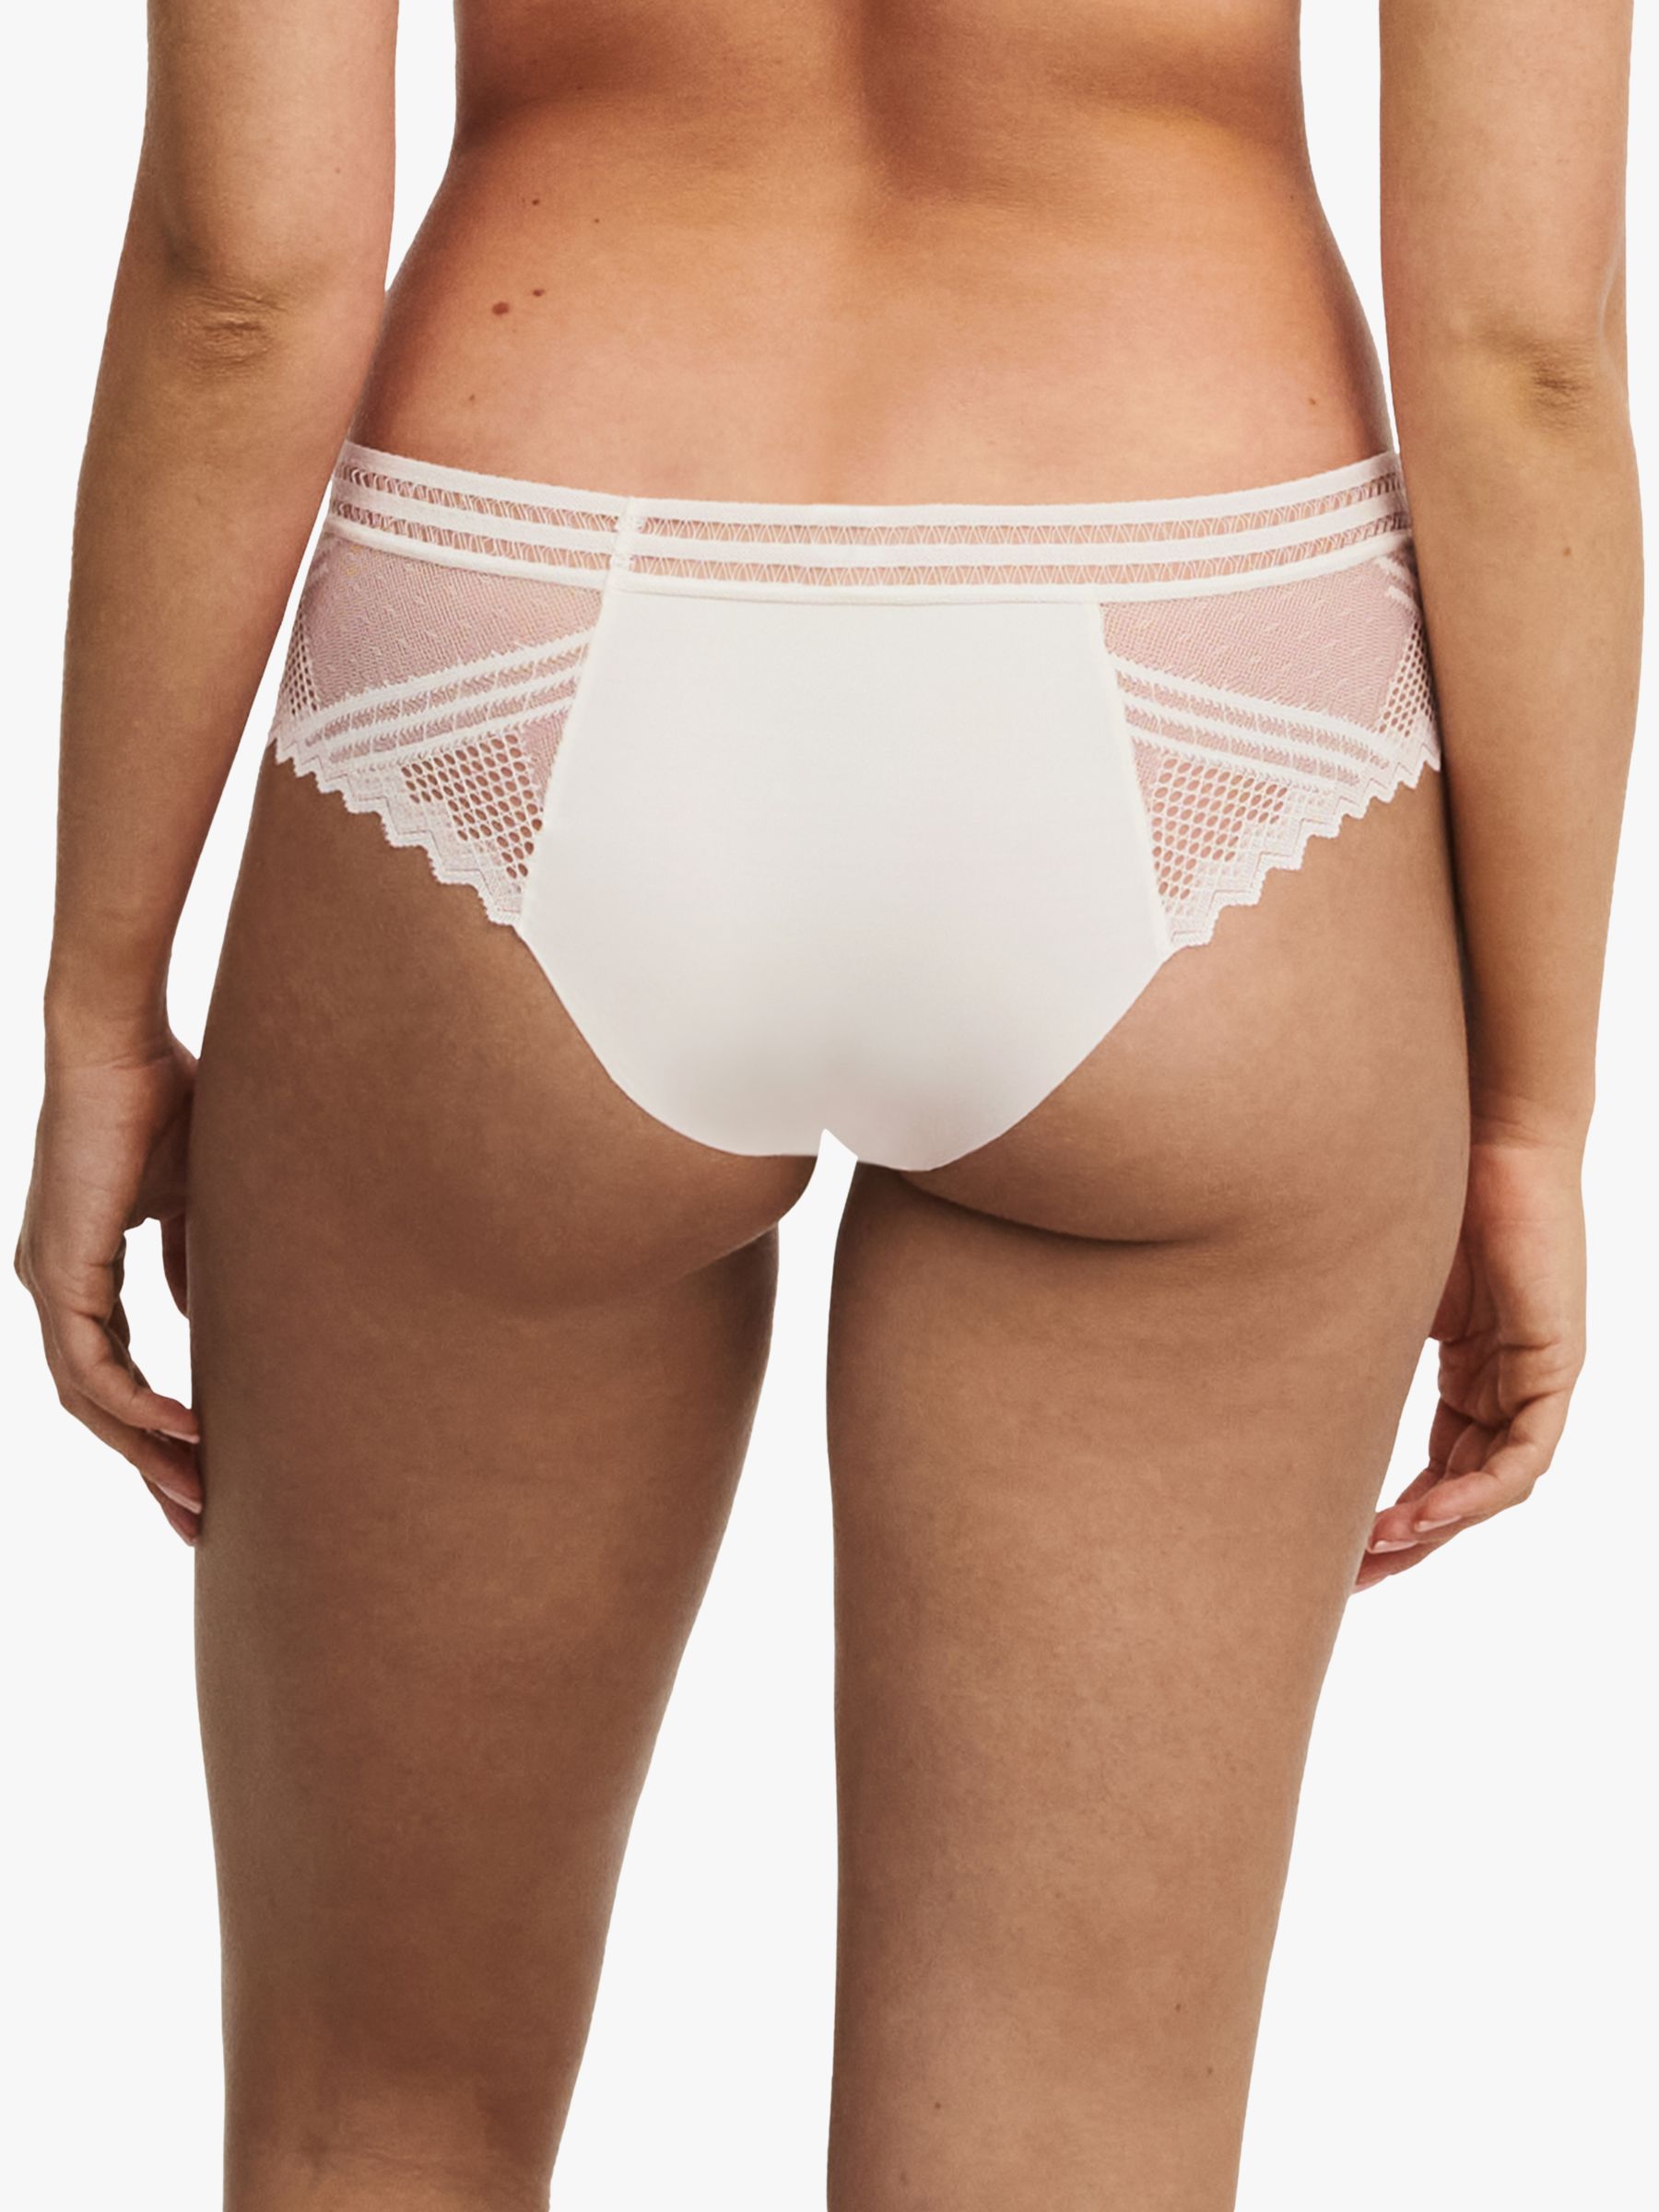 Buy Passionata Rodeo Shorty Knickers Online at johnlewis.com